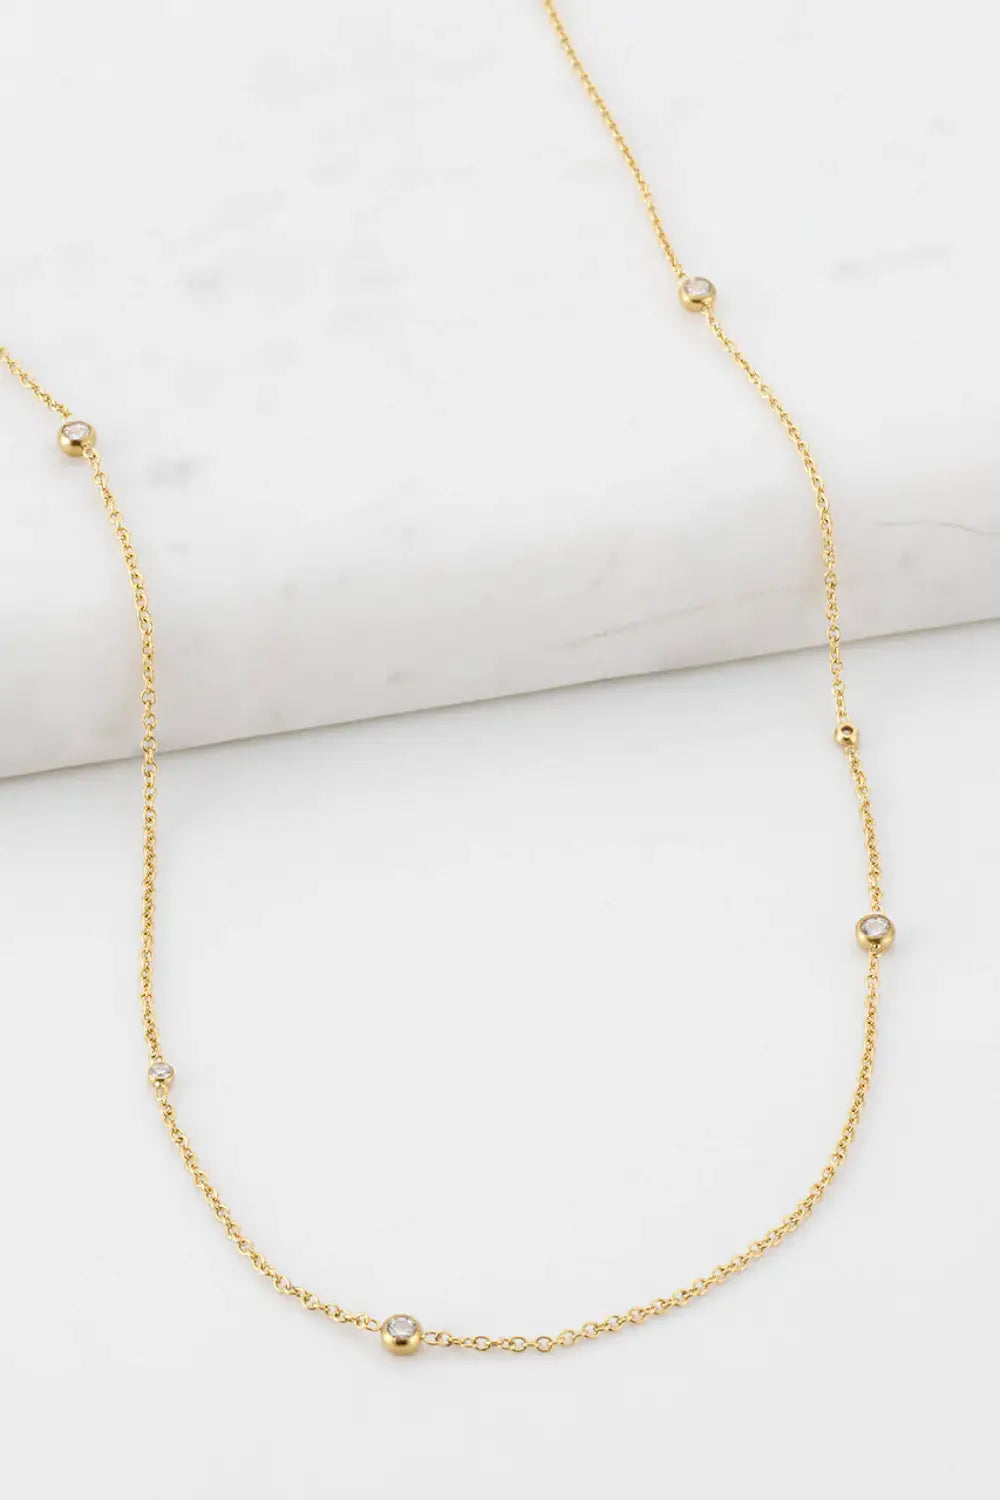 TIANA NECKLACE GOLD